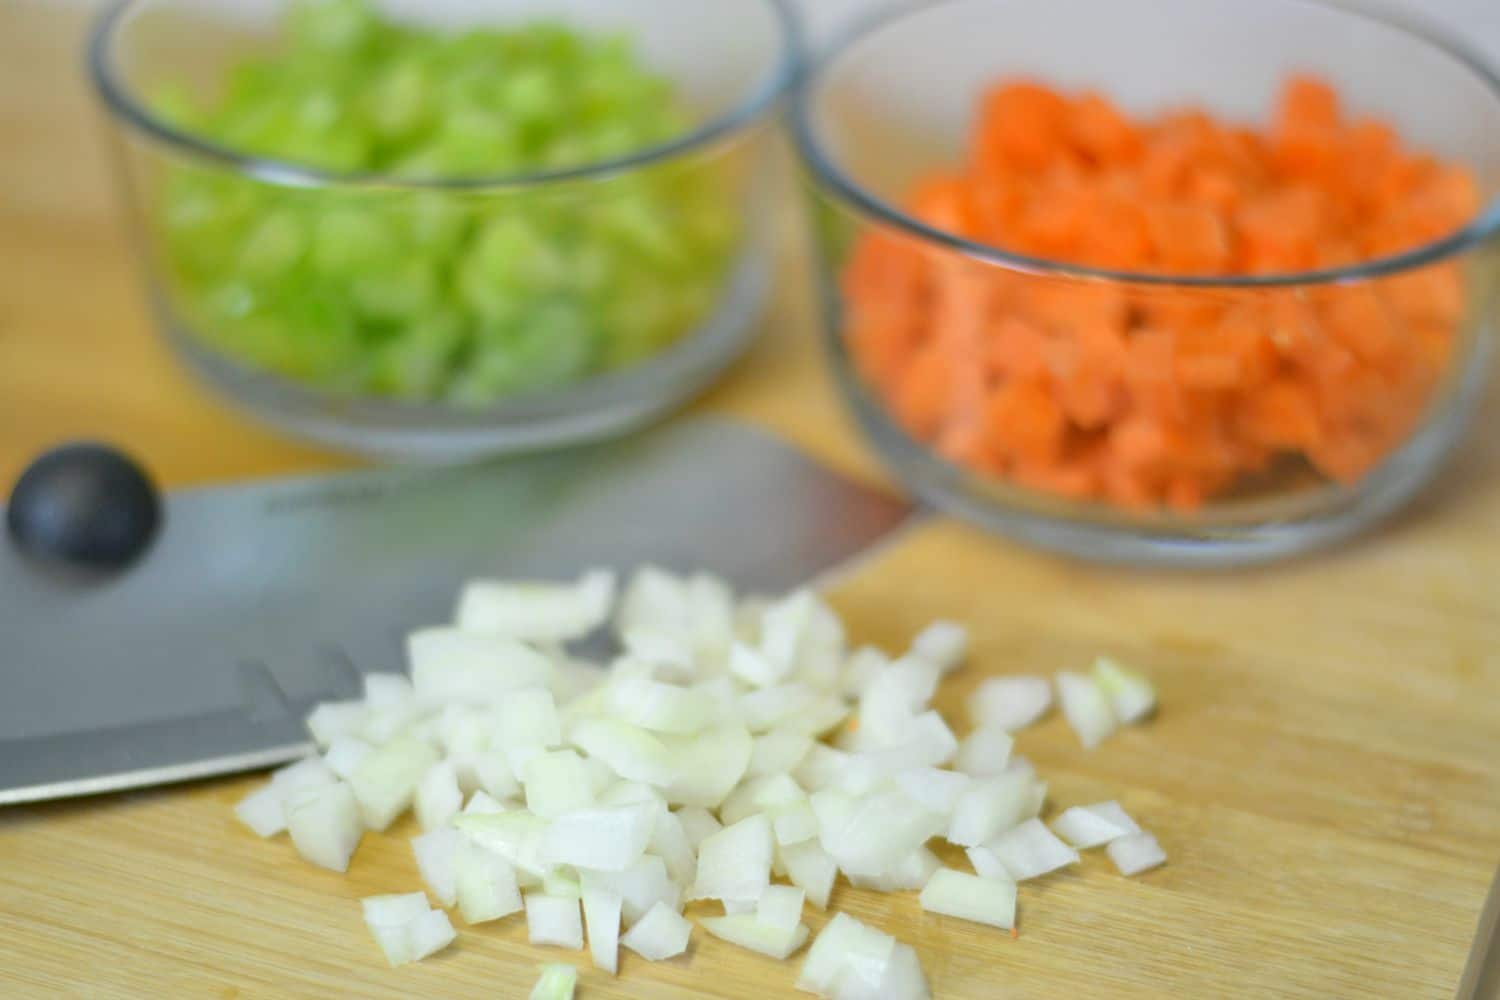 When prepping veggies and other ingredients, remember to make enough for multiple recipes that use the same ingredients